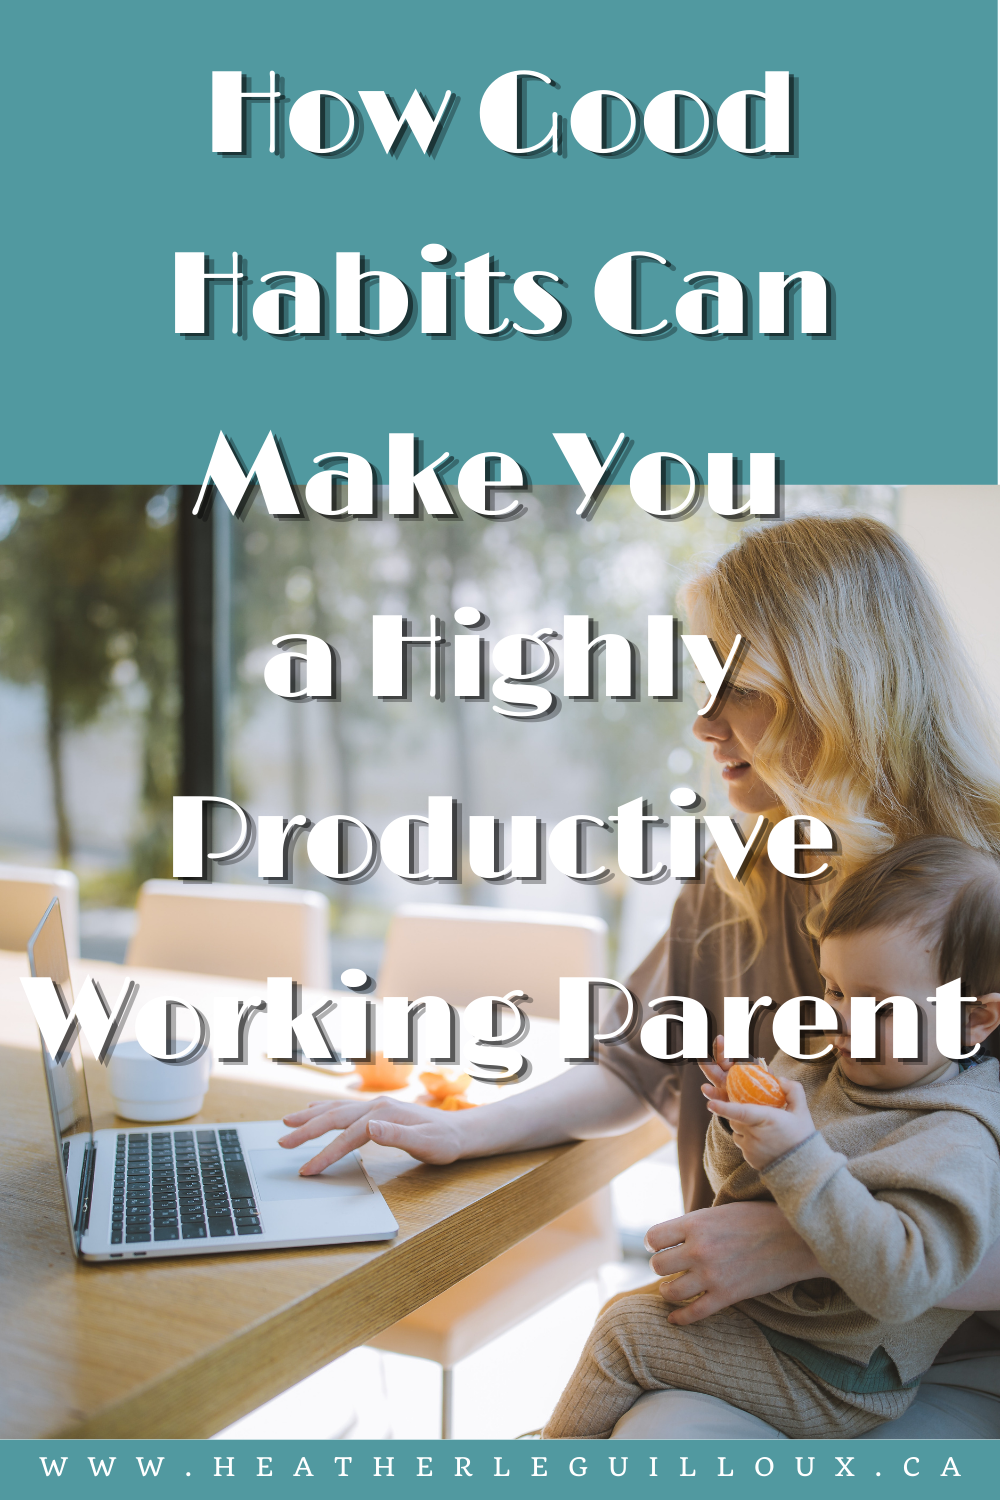 If you're a mom or a dad struggling to manage both home and work life, the good news is that there are plenty of good habits you can adopt to make things easier. These practices will not only help you become more productive as a working parent, but they will also free up your time. As a result, you get to share and enjoy more meaningful moments with your loved ones. #workingparent #productive #habits #organization